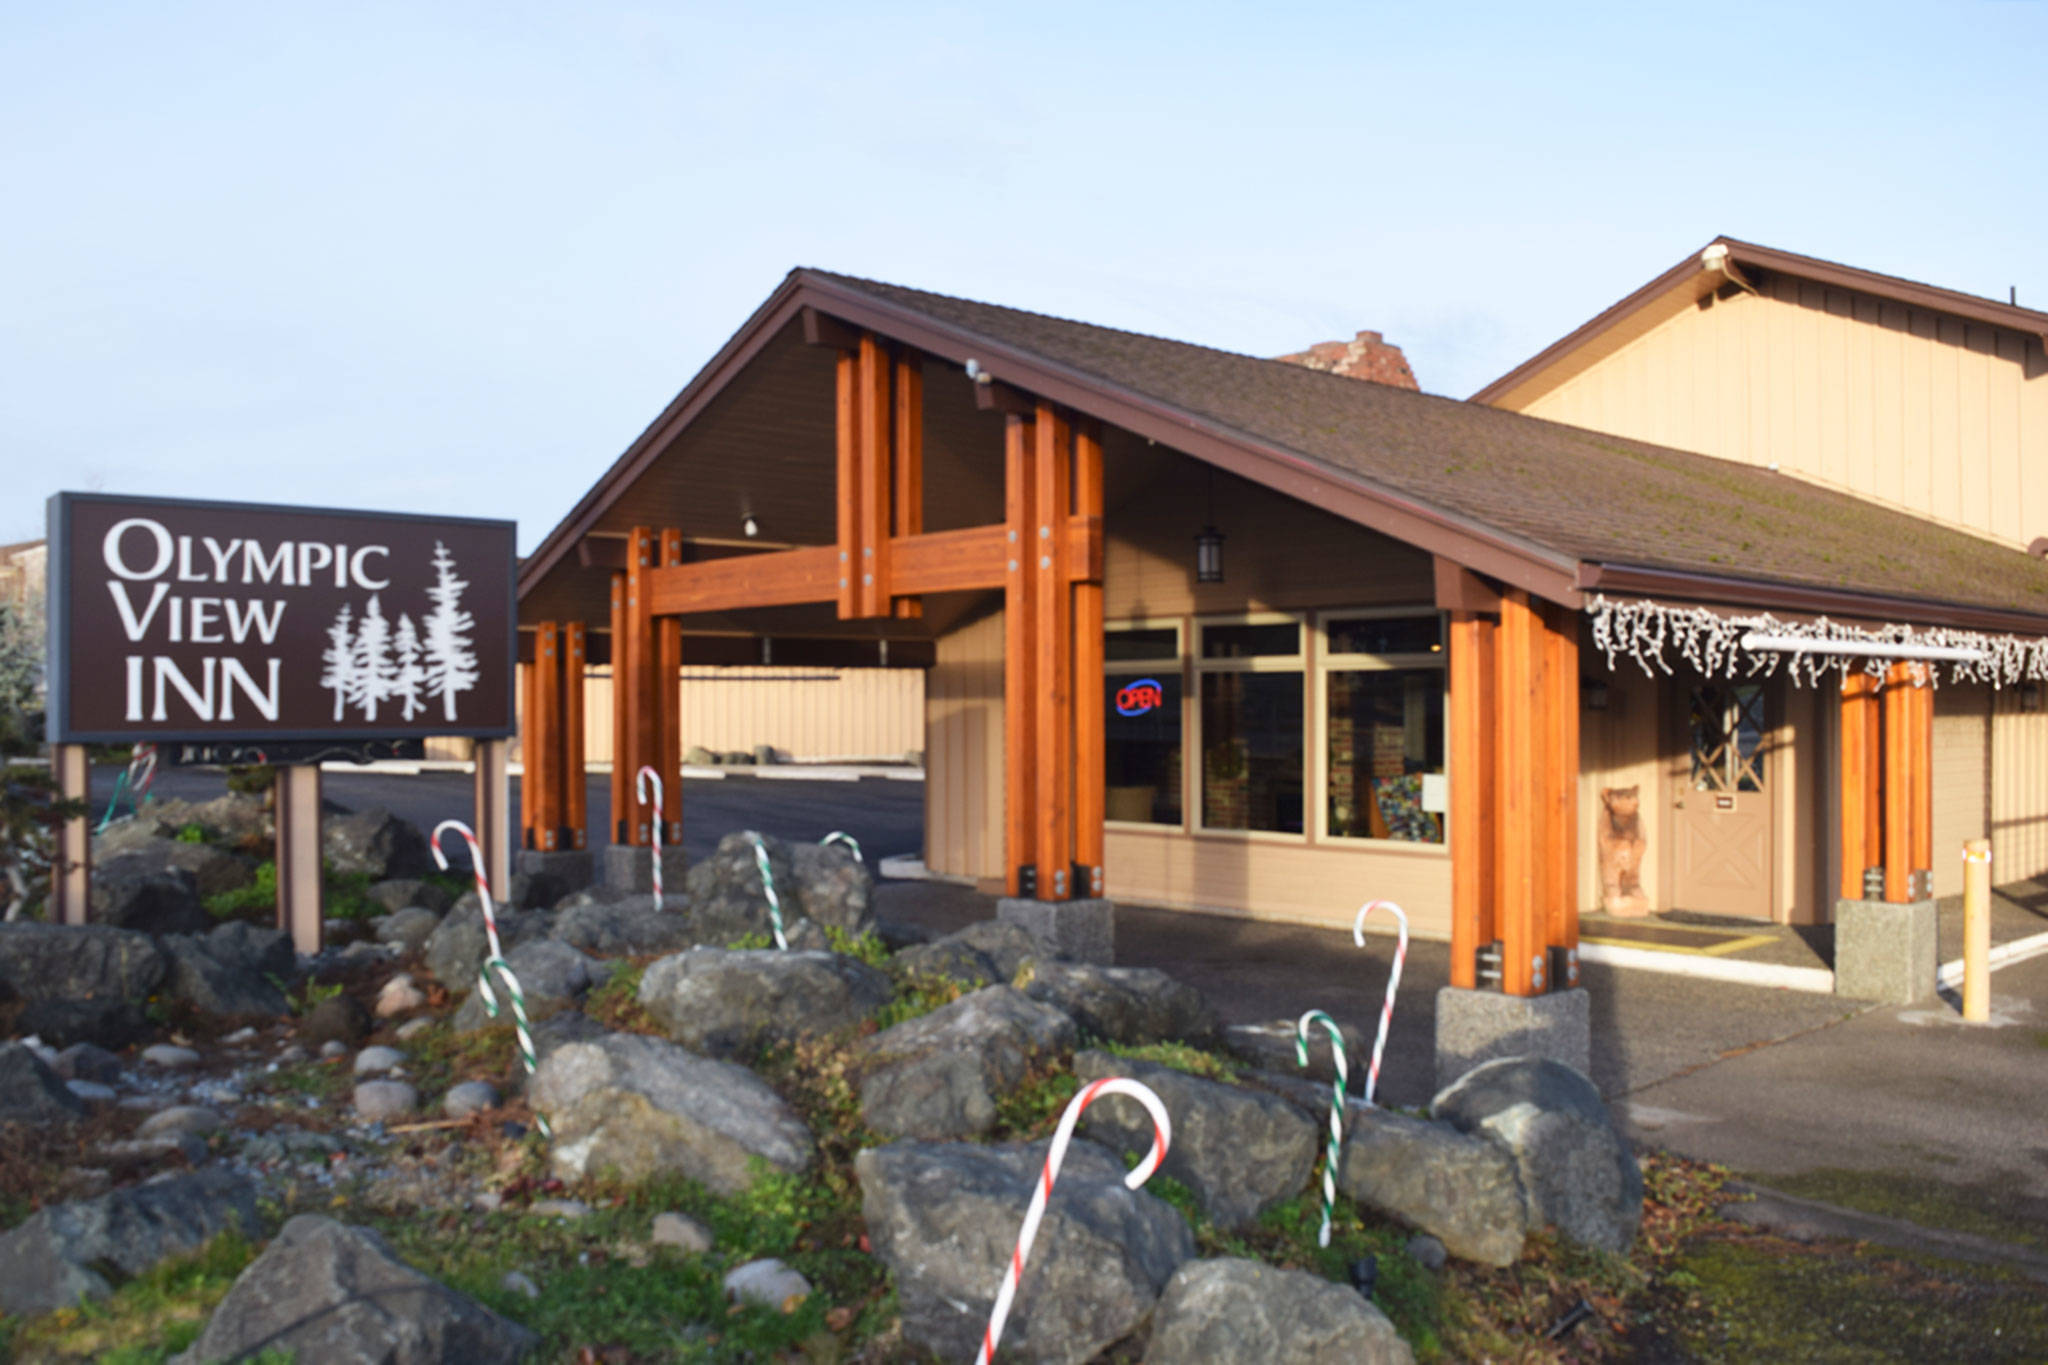 Olympic View Inn is under new ownership by Chintu Patel, a Forks resident, who bought the hotel and its property for about $2.6 million. (Erin Hawkins/Olympic Peninsula News Group)